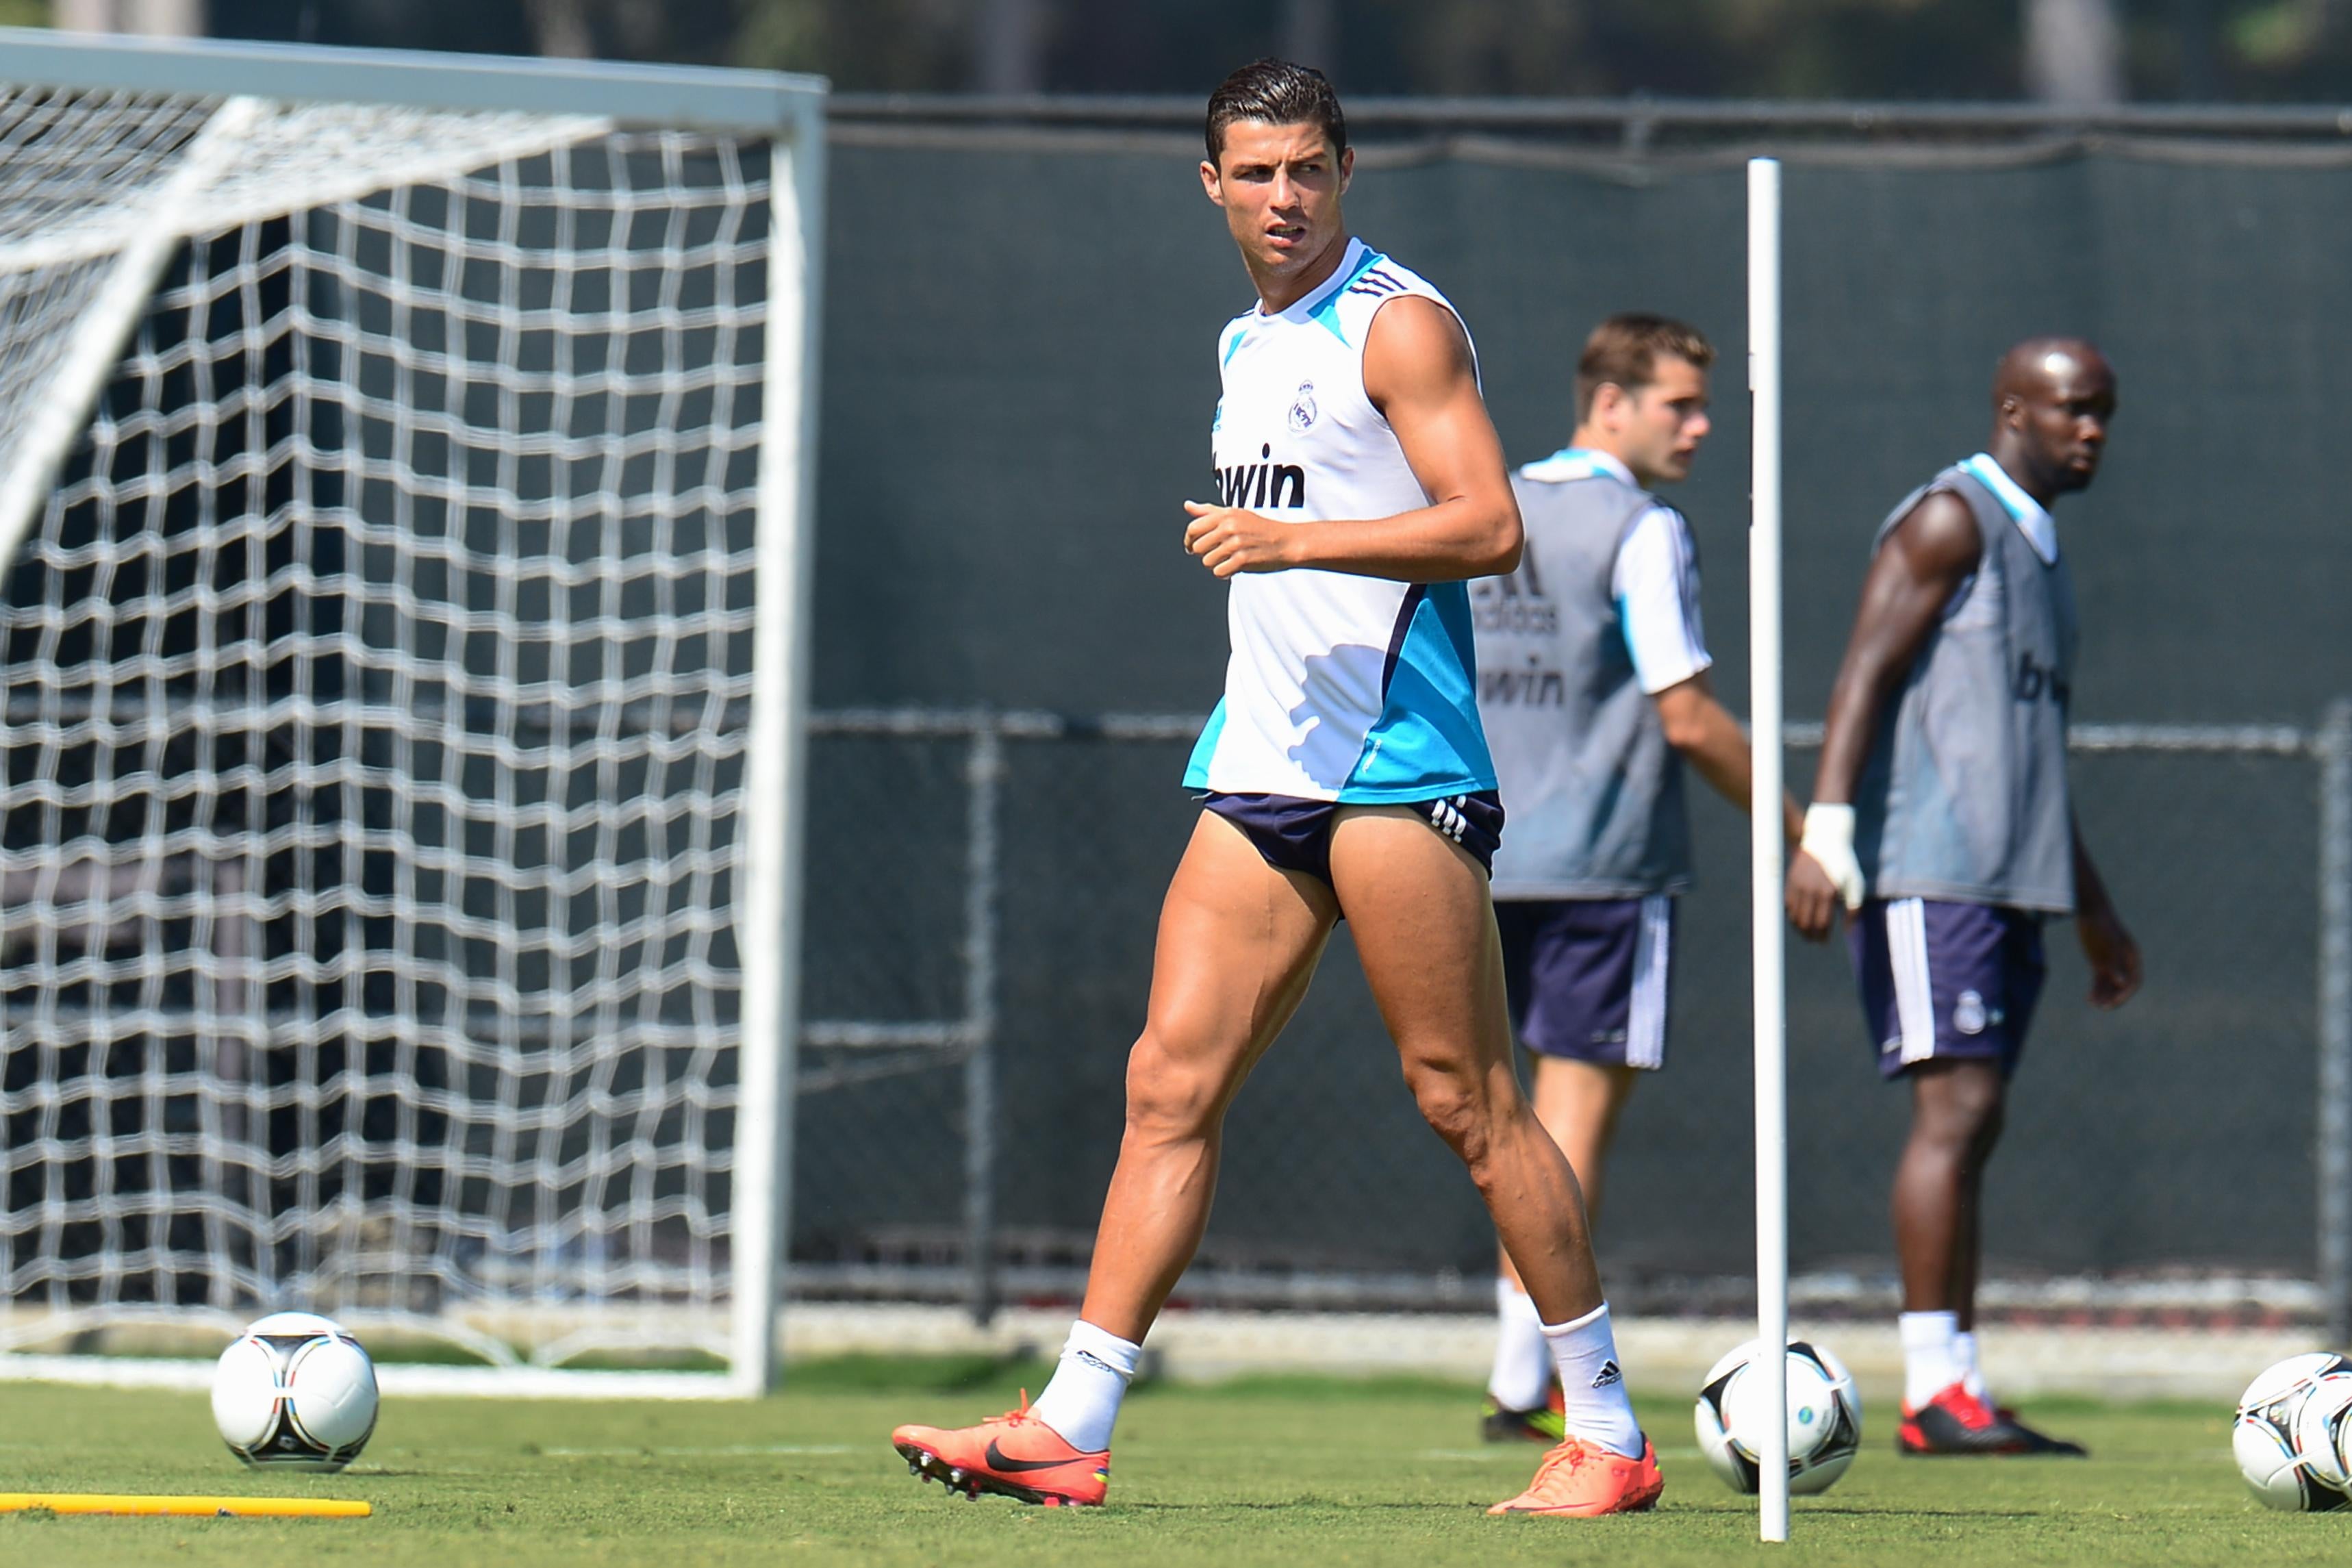 Real Madrid's Cristiano Ronaldo, with his shorts pulled up high, during a training session.